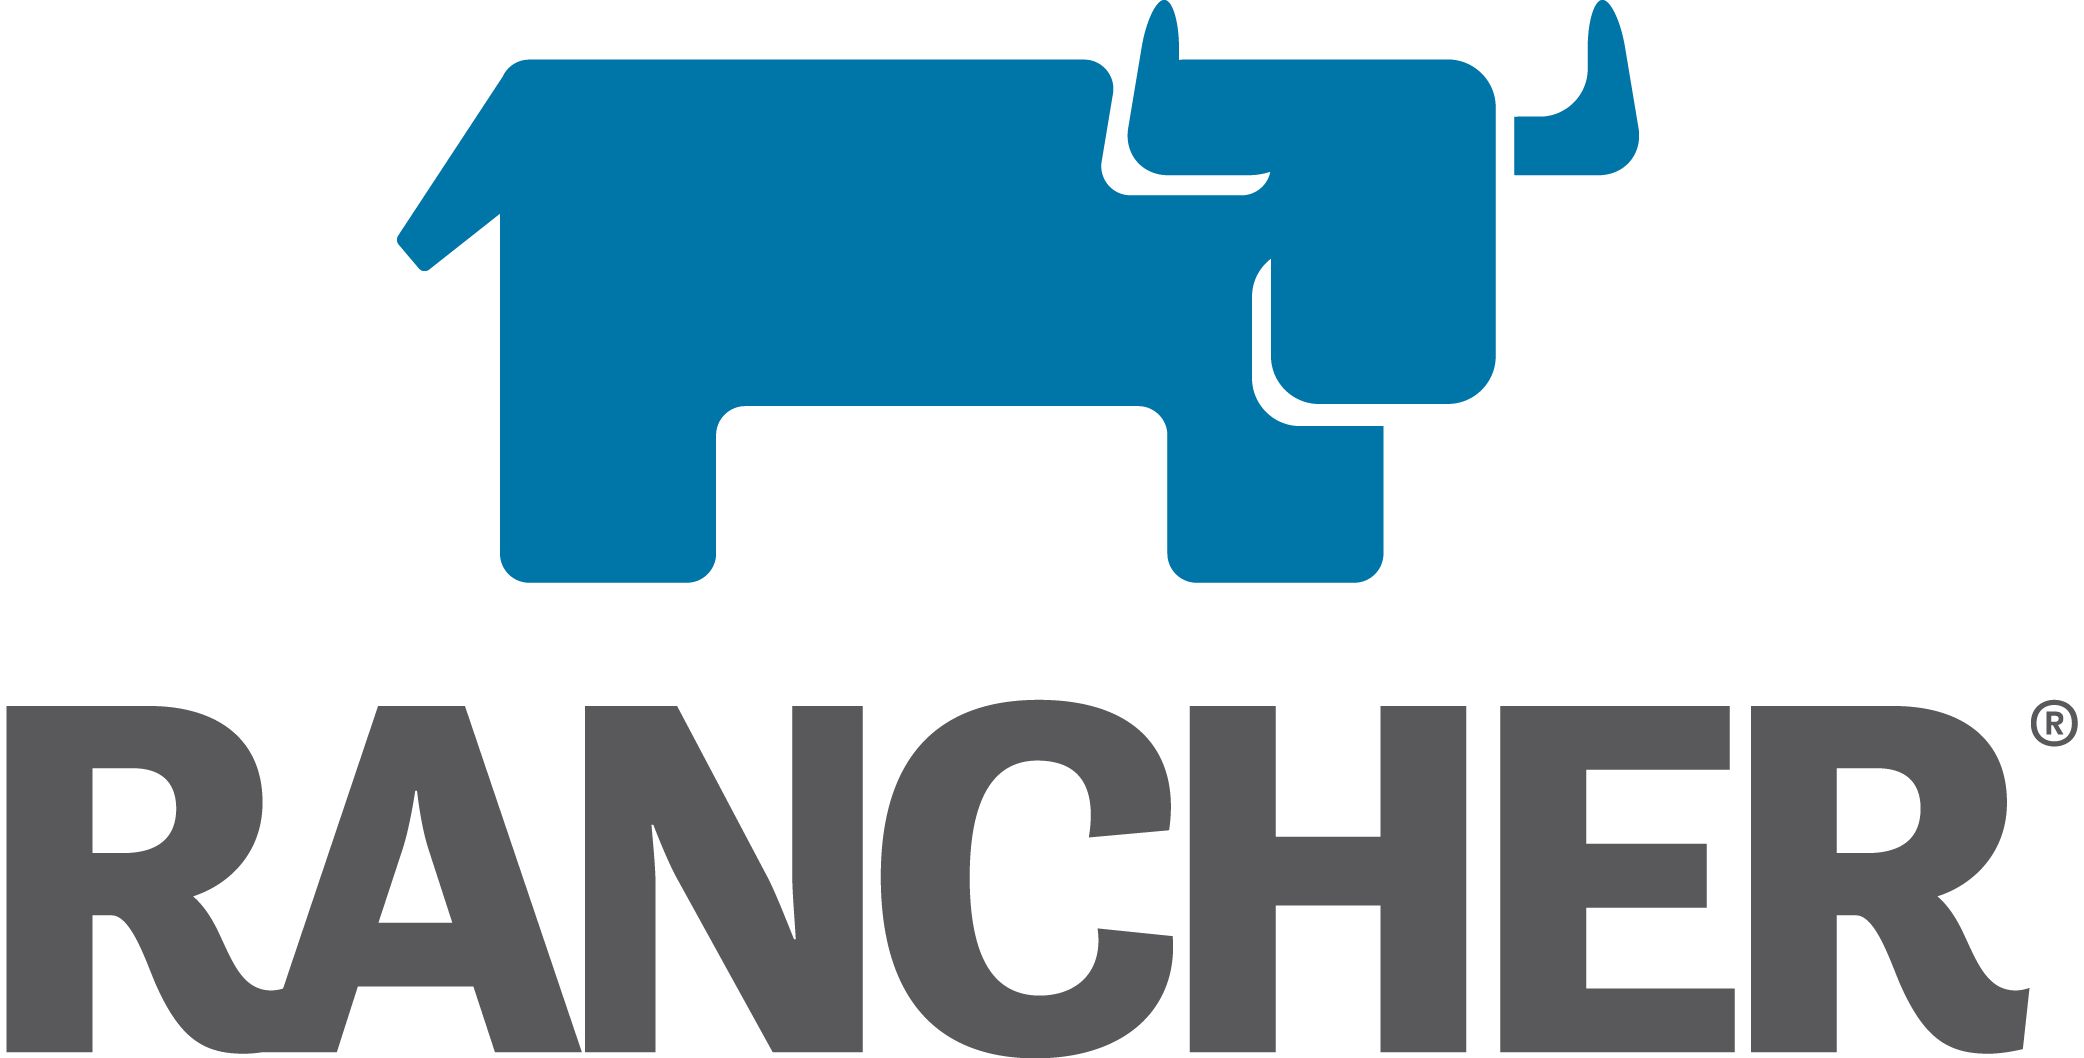 Rancher Overview